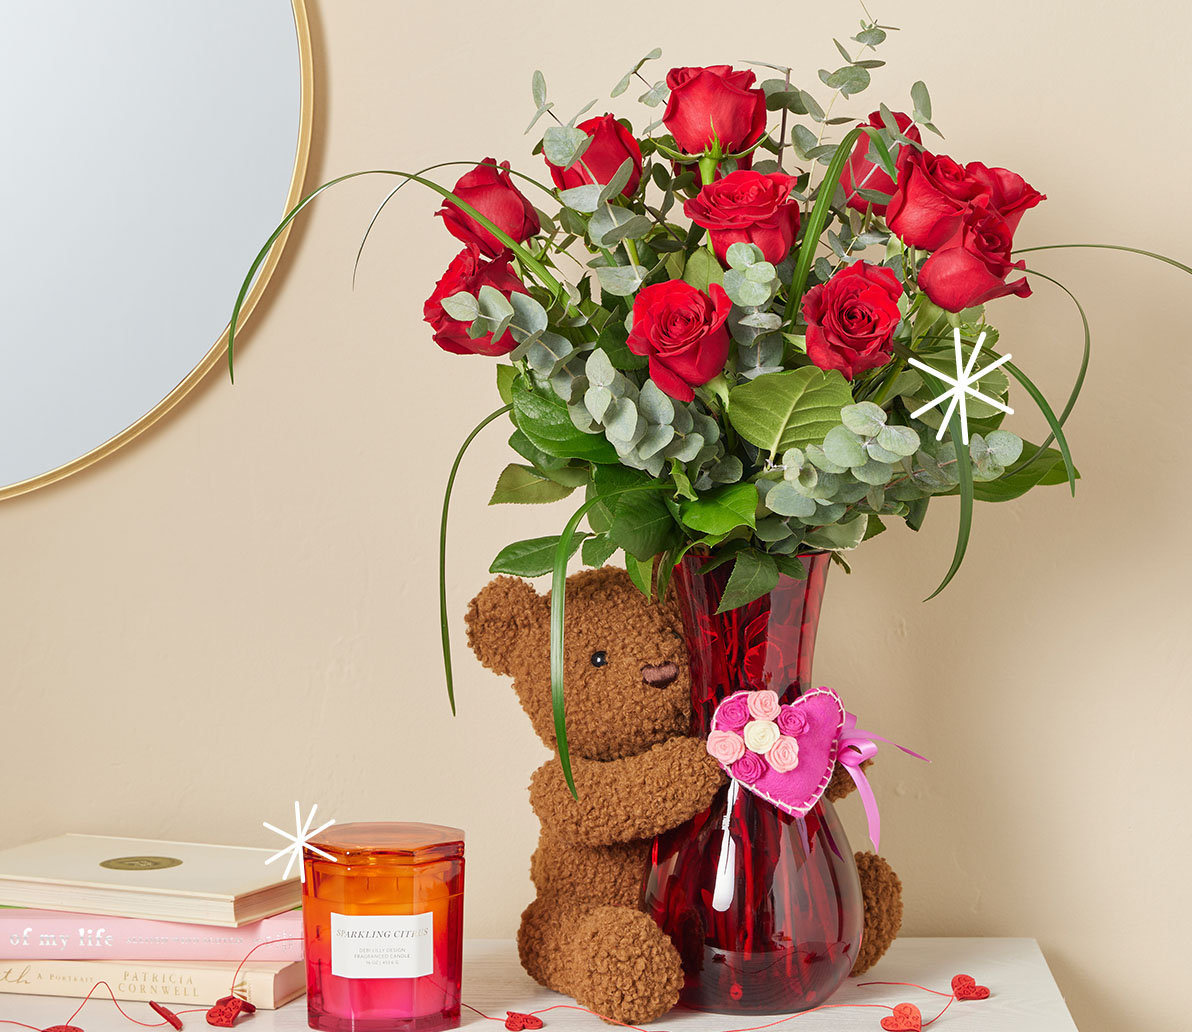 Shop for Flowers, Cards, Occasion at your local Tom Thumb Online or In-Store